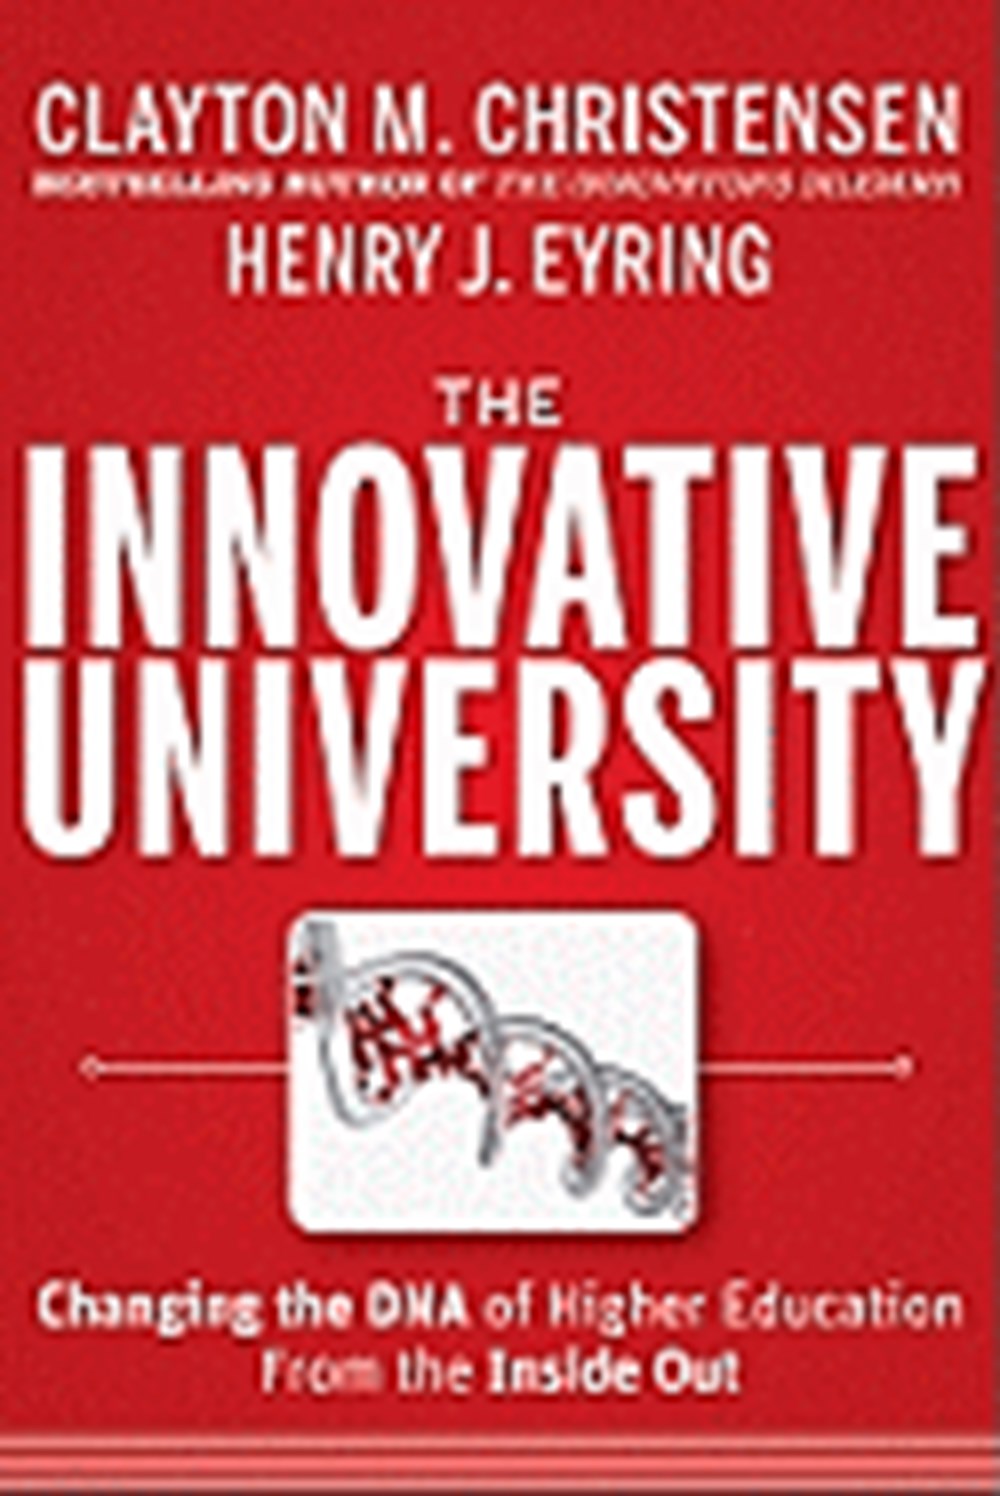 Innovative University: Changing the DNA of Higher Education from the Inside Out